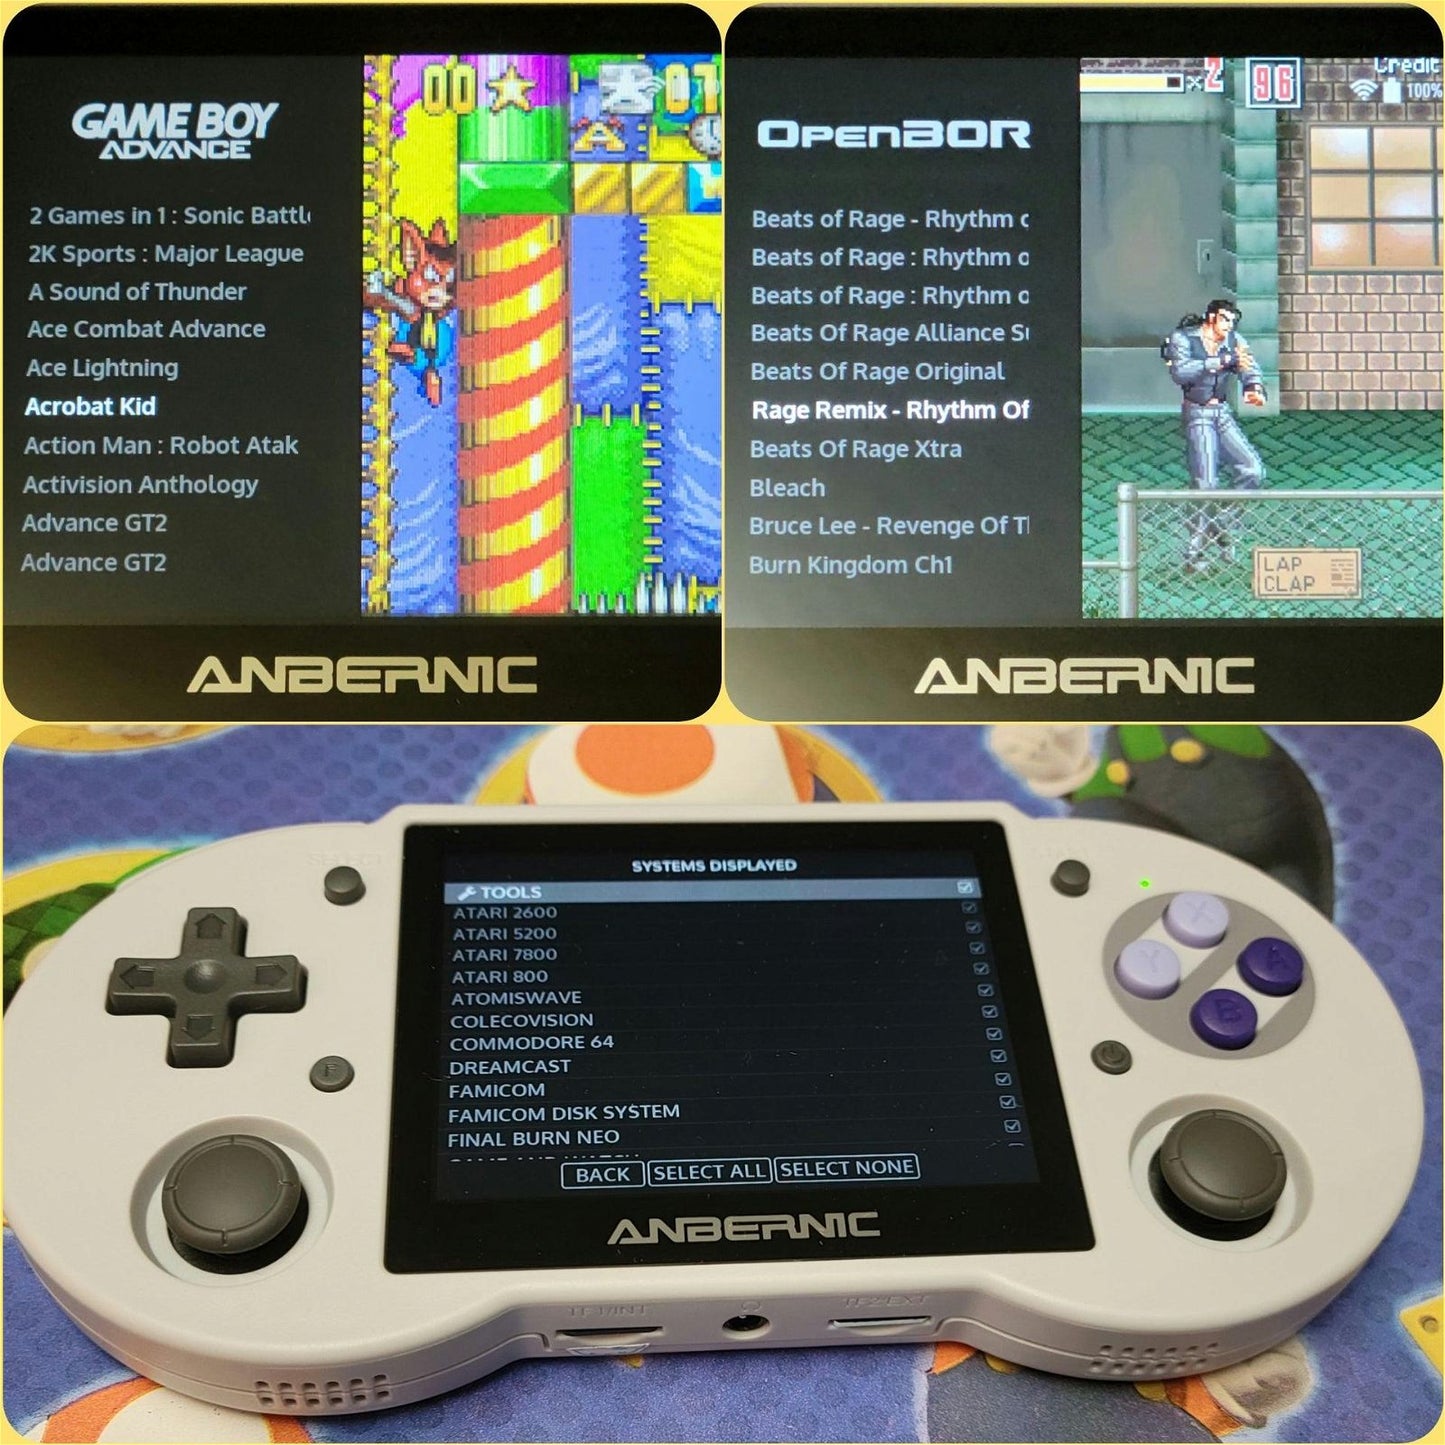 New Anbernic RG353P portable handheld game console, 256GB fully configured Linux OS - Arcadeclassics